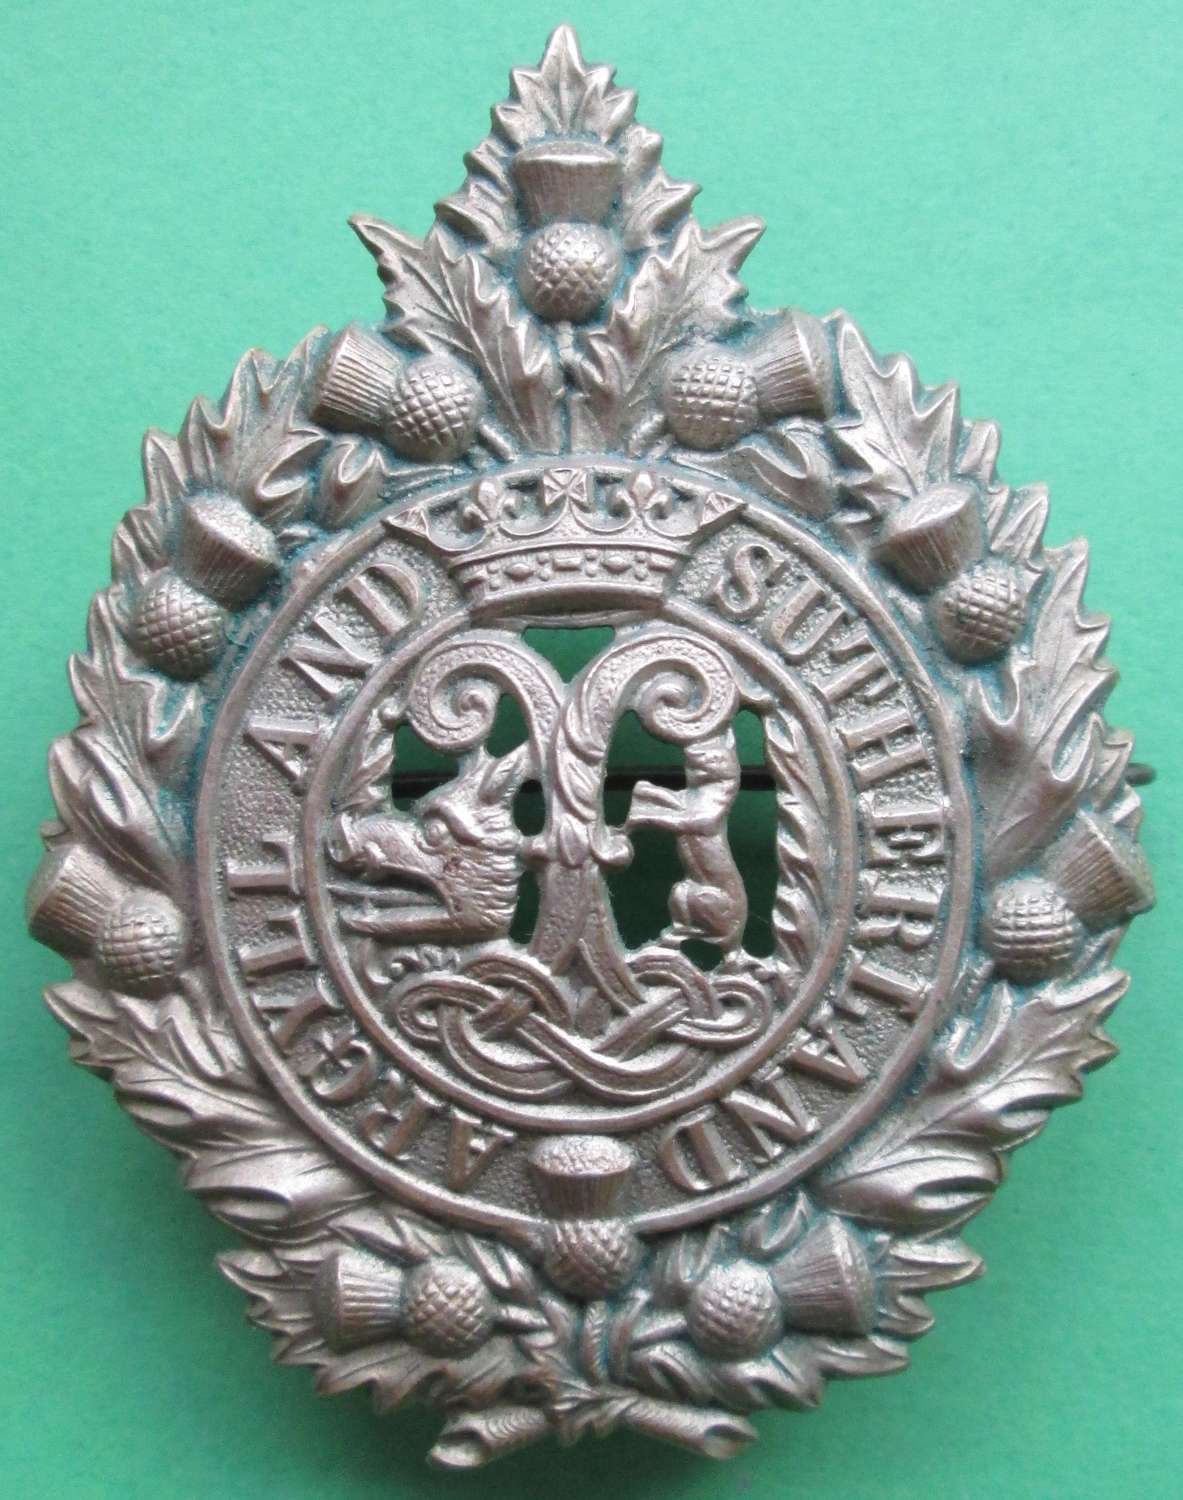 AN ARGYLL AND SUTHERLAND BADGE